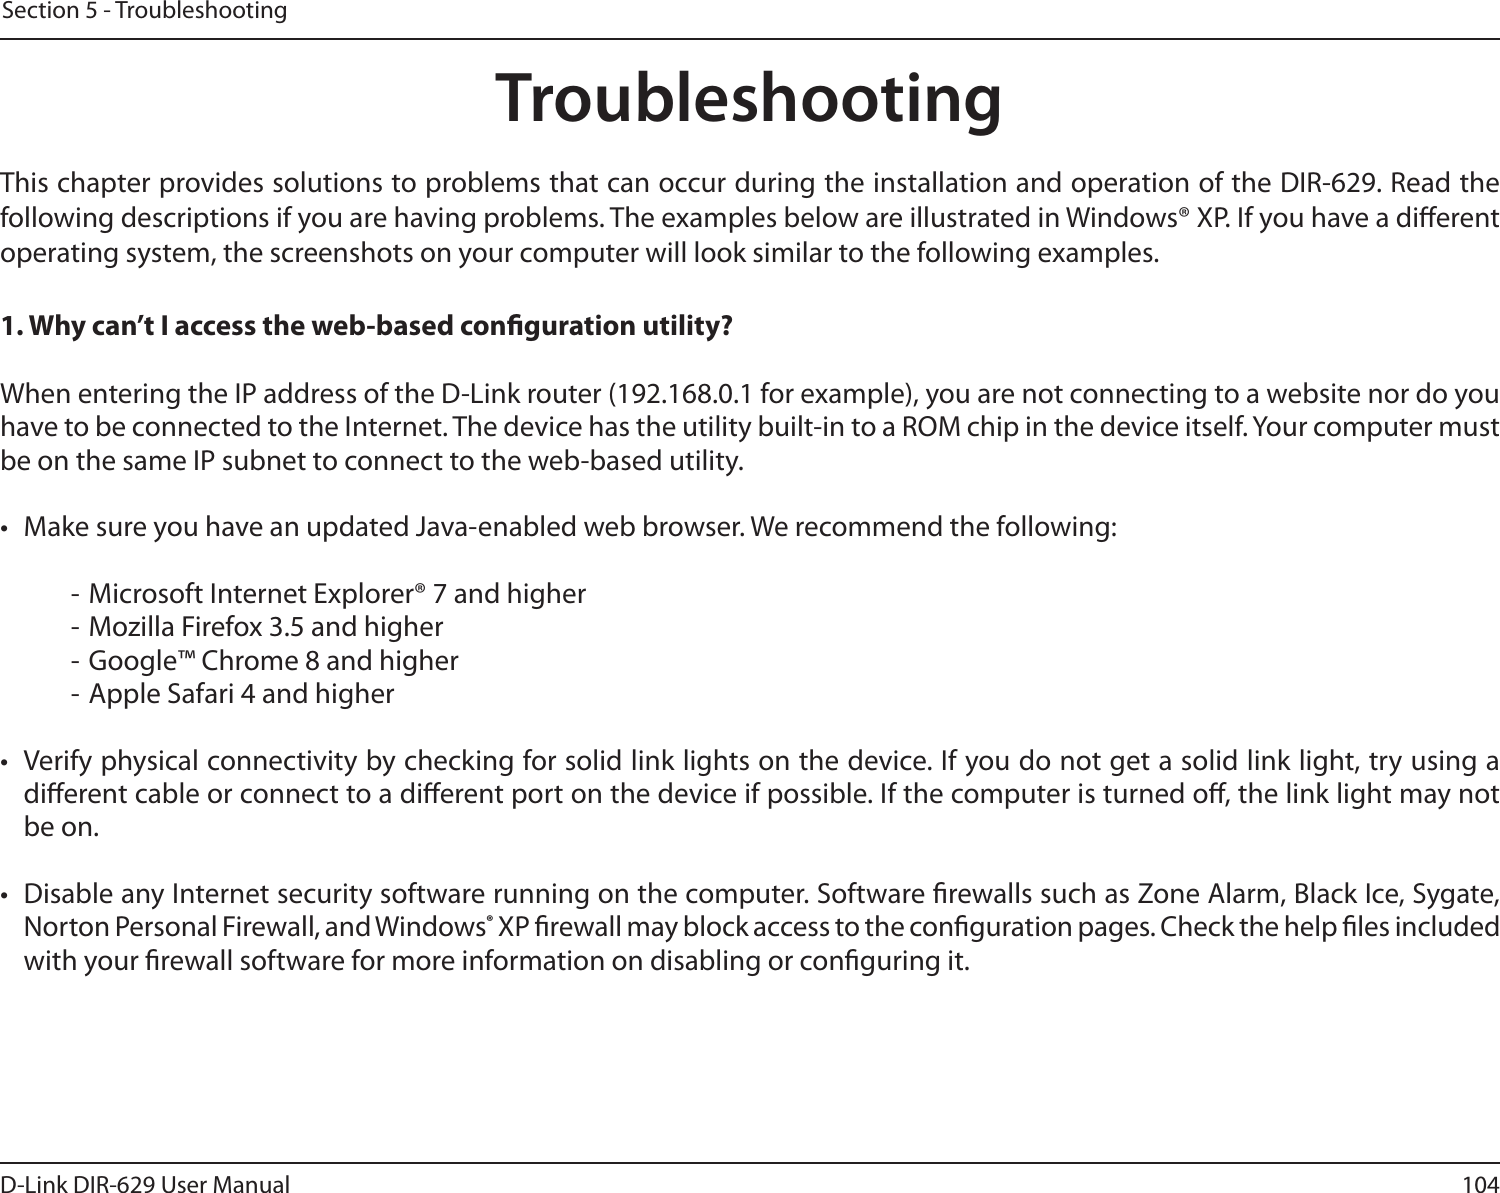 104D-Link DIR-629 User ManualSection 5 - TroubleshootingTroubleshootingfollowing descriptions if you are having problems. The examples below are illustrated in Windows® XP. If you have a dierent operating system, the screenshots on your computer will look similar to the following examples.1. Why can’t I access the web-based conguration utility?When entering the IP address of the D-Link router (192.168.0.1 for example), you are not connecting to a website nor do you be on the same IP subnet to connect to the web-based utility.   - Microsoft Internet Explorer® 7 and higher- Mozilla Firefox 3.5 and higher- Google™ Chrome 8 and higher- Apple Safari 4 and higher dierent cable or connect to a dierent port on the device if possible. If the computer is turned o, the link light may not  be on. Norton Personal Firewall, and Windows® XP rewall may block access to the conguration pages. Check the help les included with your rewall software for more information on disabling or conguring it.